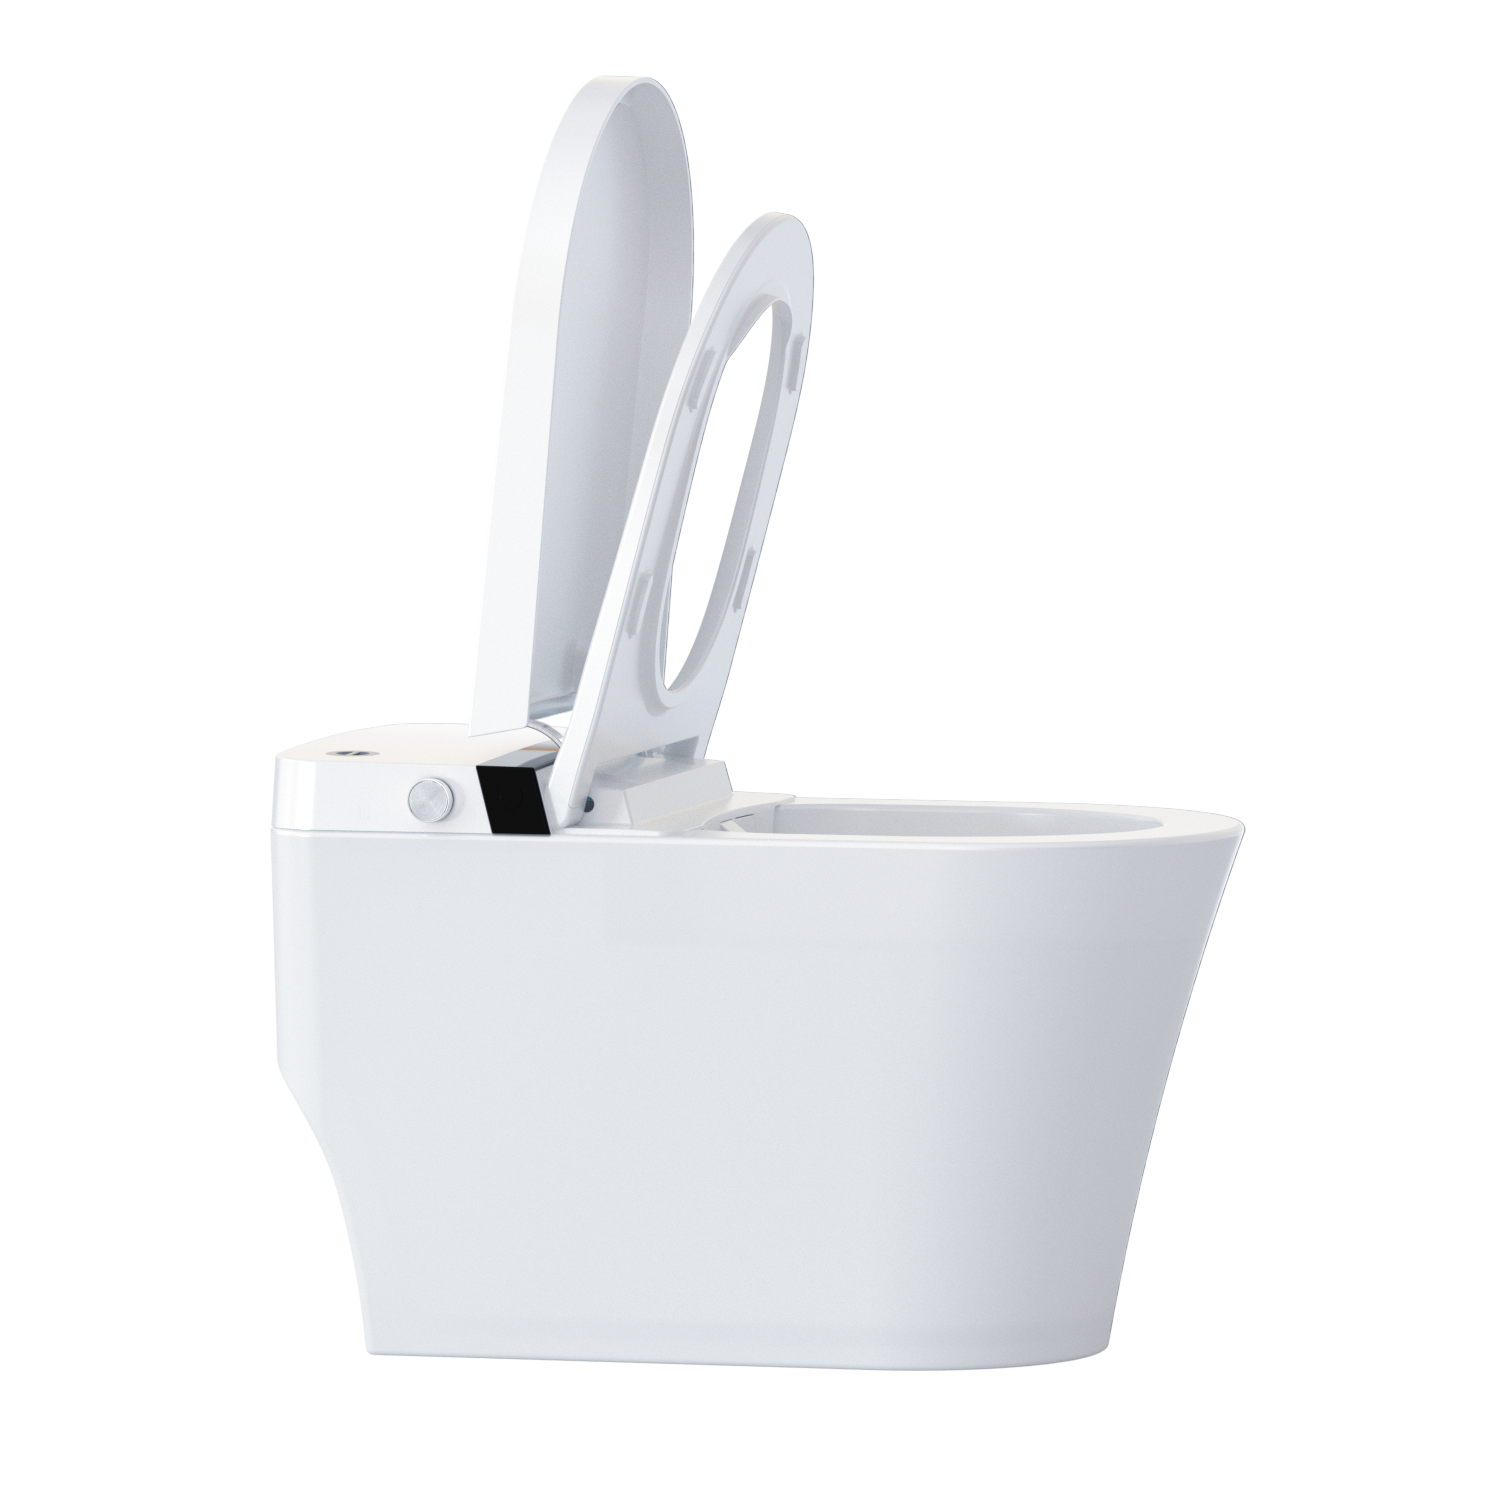 Smart Clean One Piece Toilet with Auto-Flush, Warm Water, Air Drying Function, Heated Seat, Remote Control